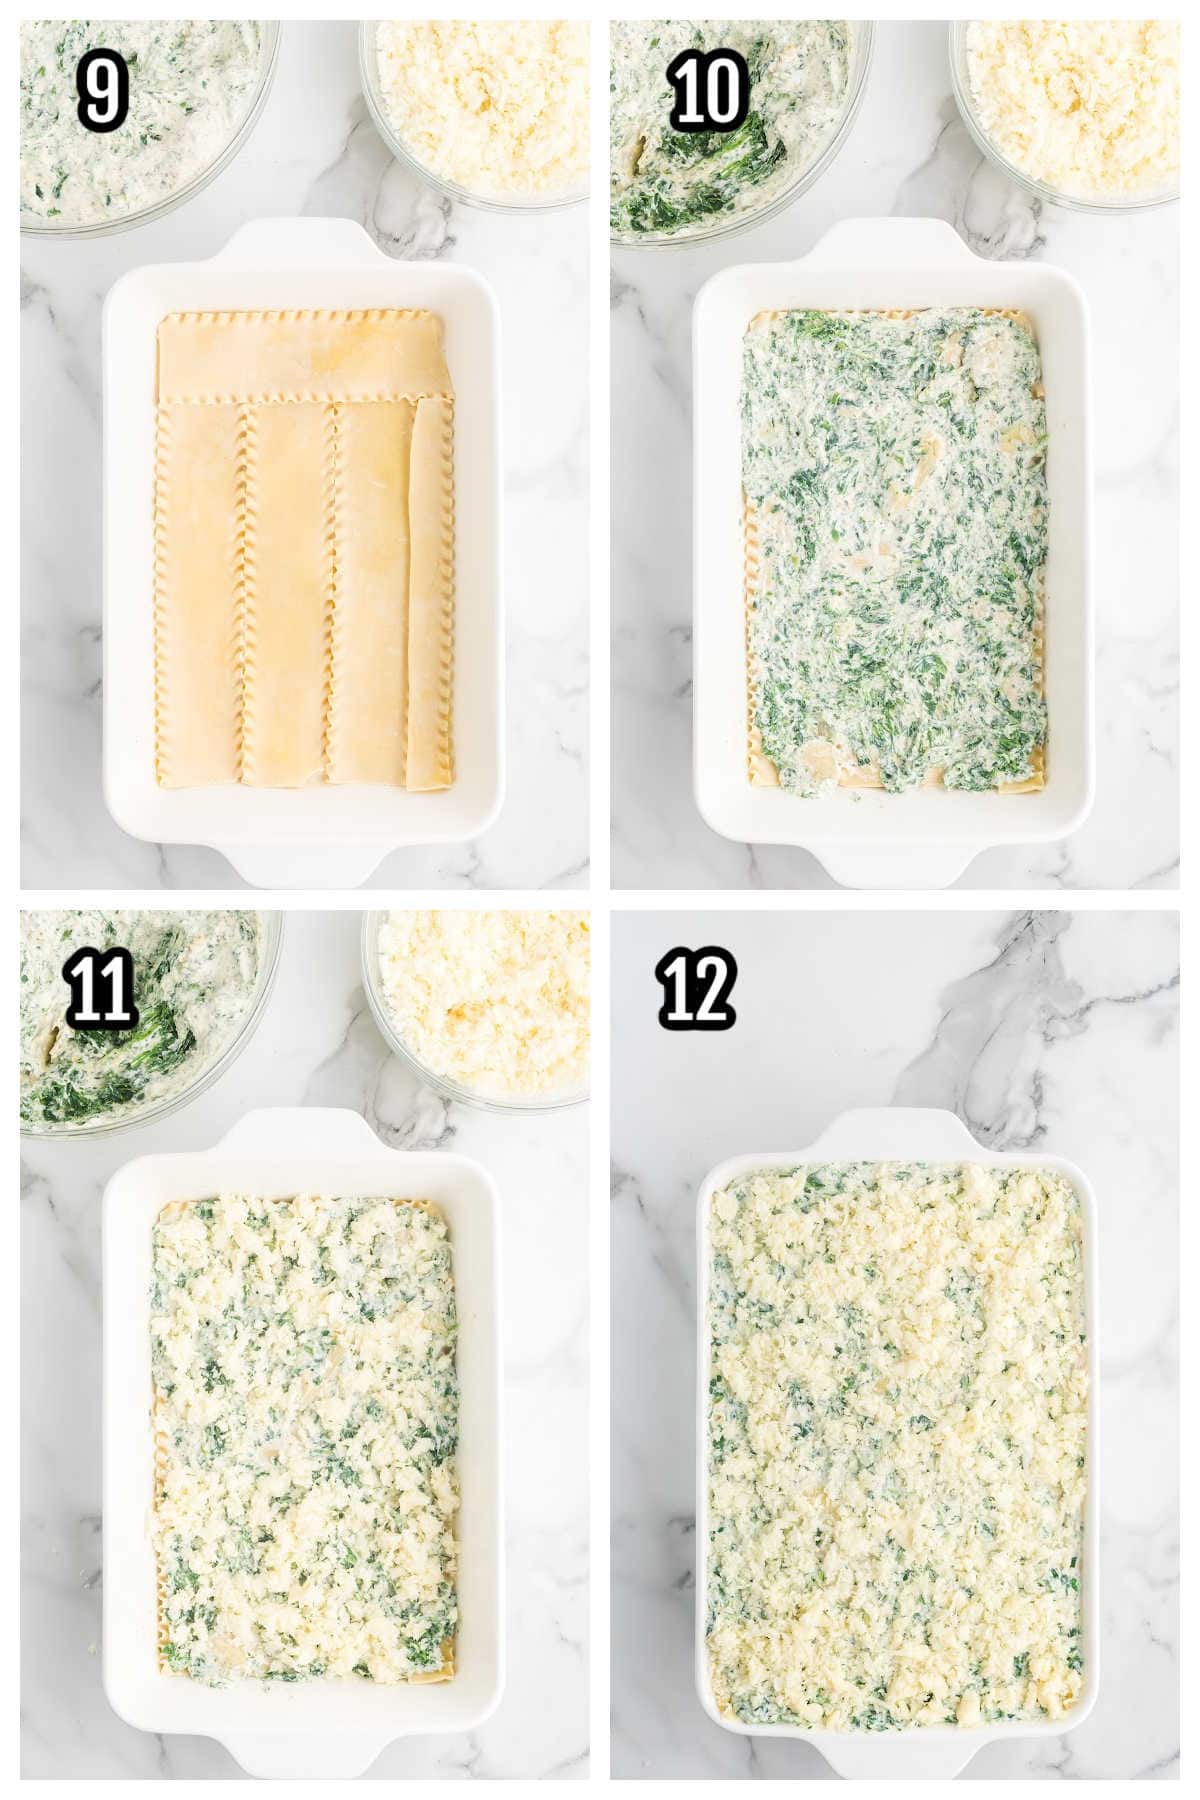 The third and final collage to cooking the white chicken lasagna. 